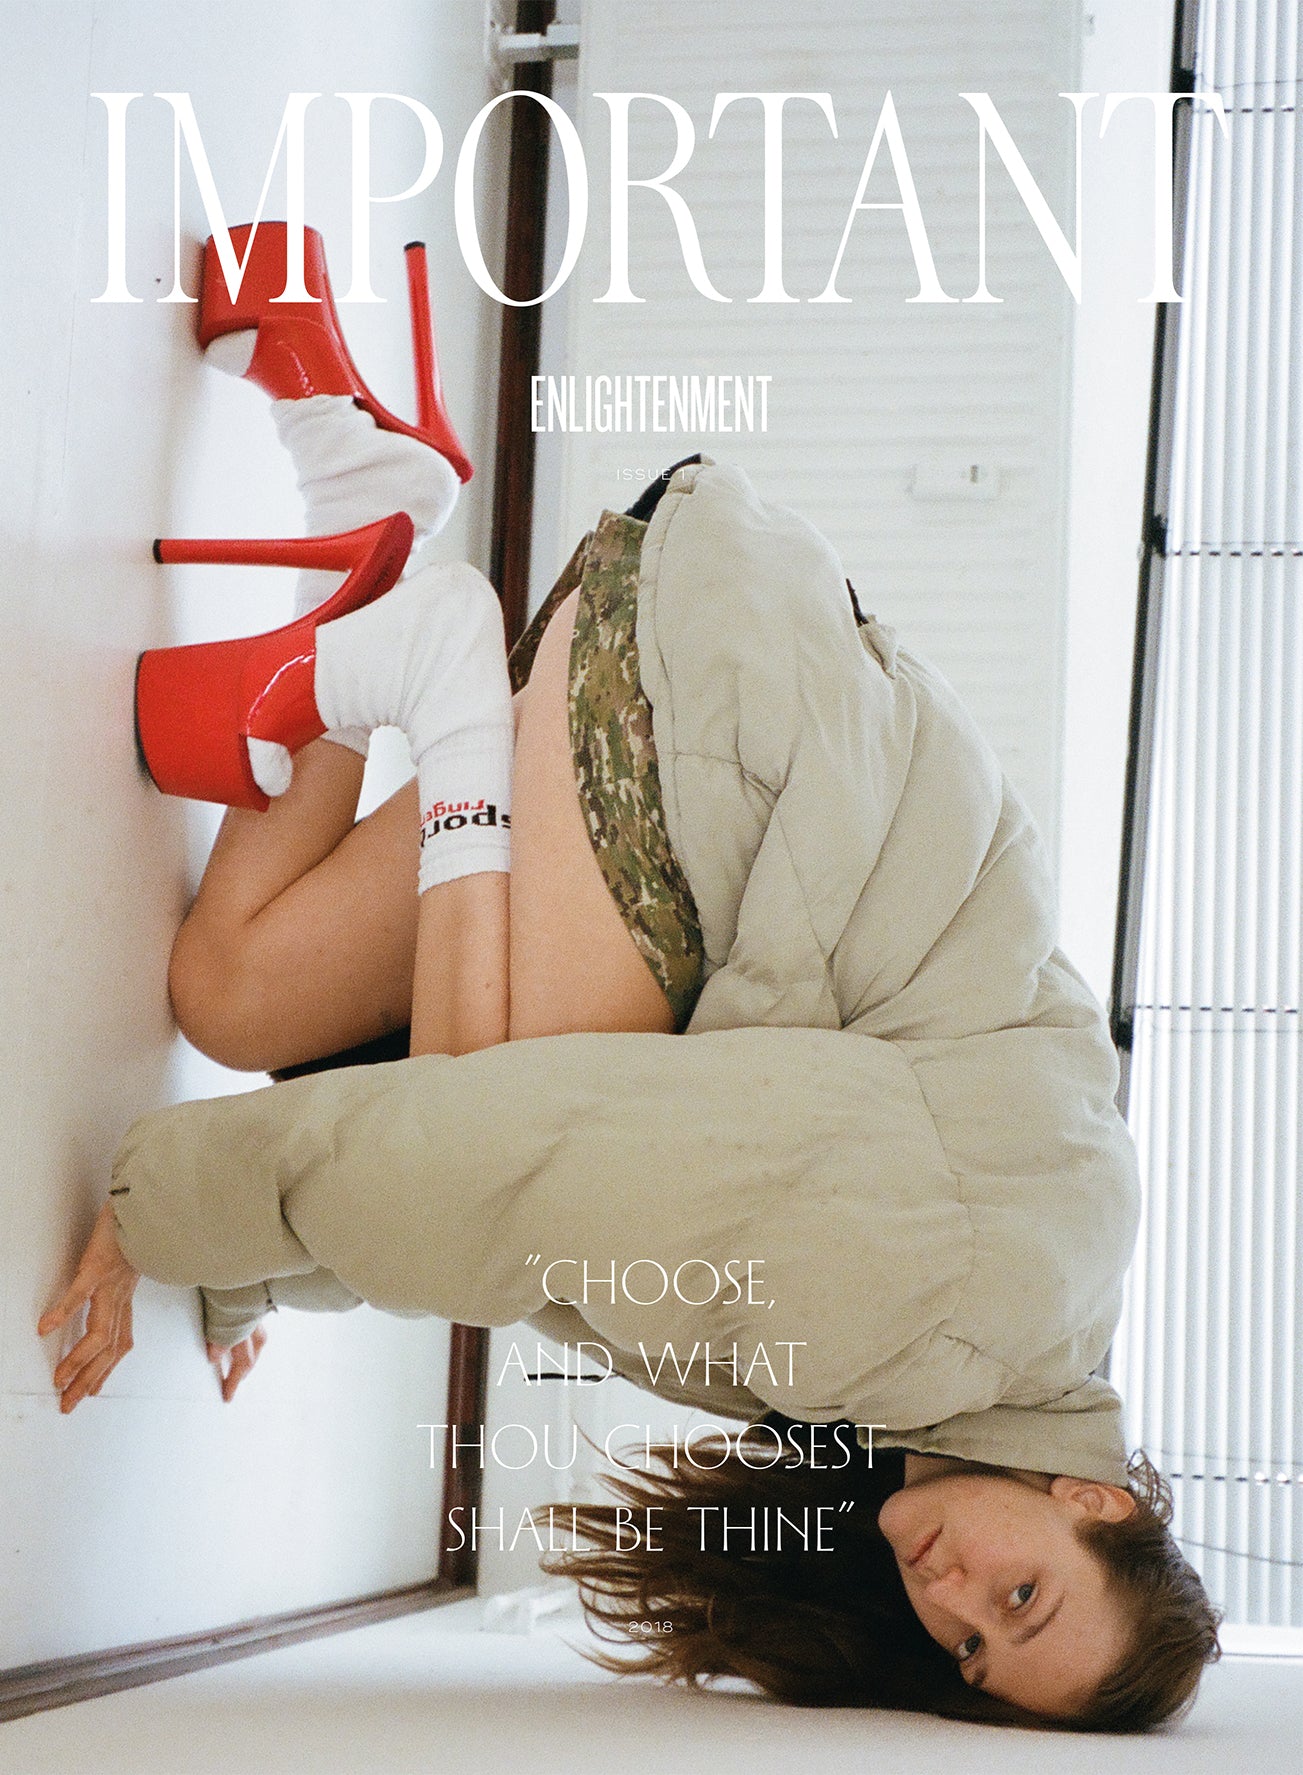 IMPORTANT MAGAZINE / ISSUE 1 / COVER BY HENRIK ALM & NICOLE WALKER